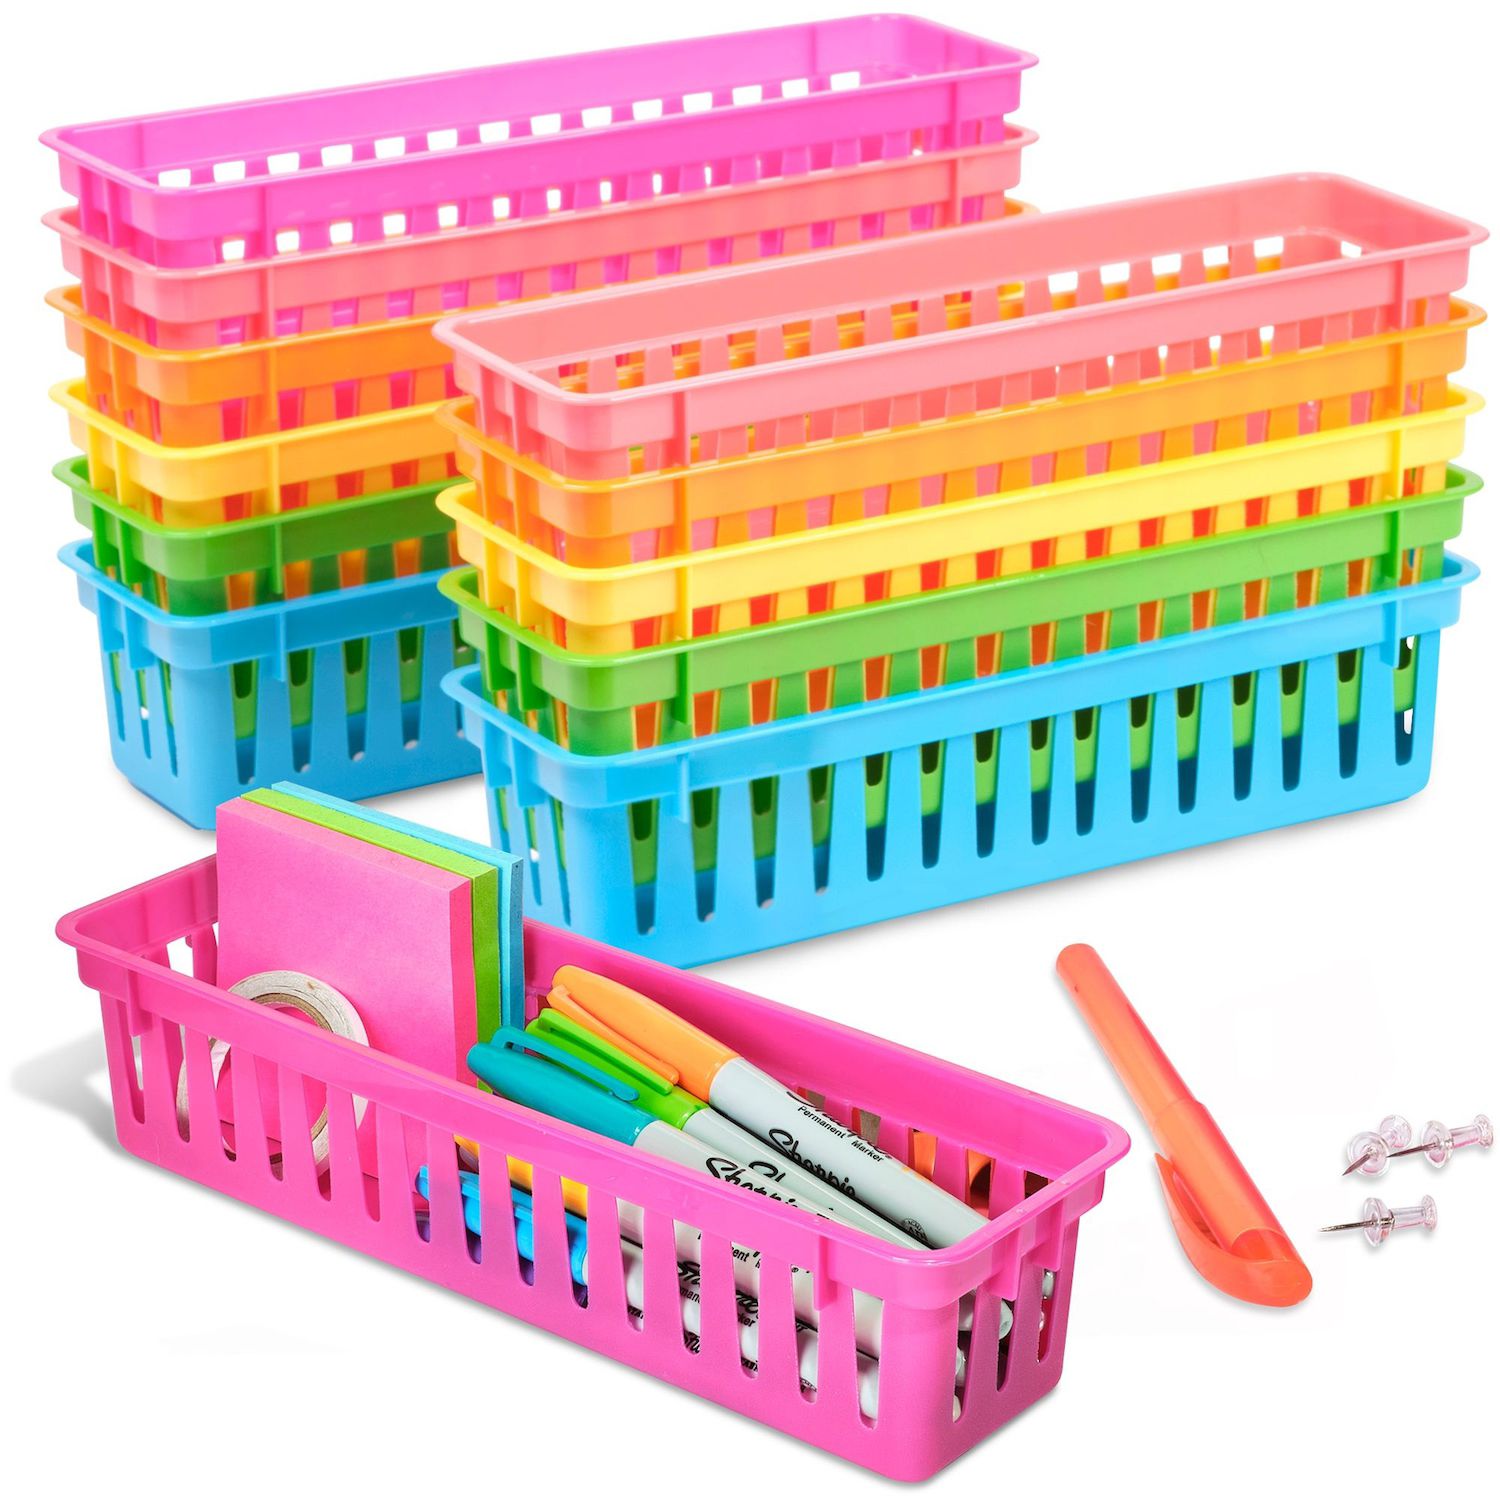 Bright Creations 8 Pack Colorful Storage Bins for Classroom - Small Plastic Baskets for Organizing, Arts, Crafts, Desks, Toys (4 Colors)